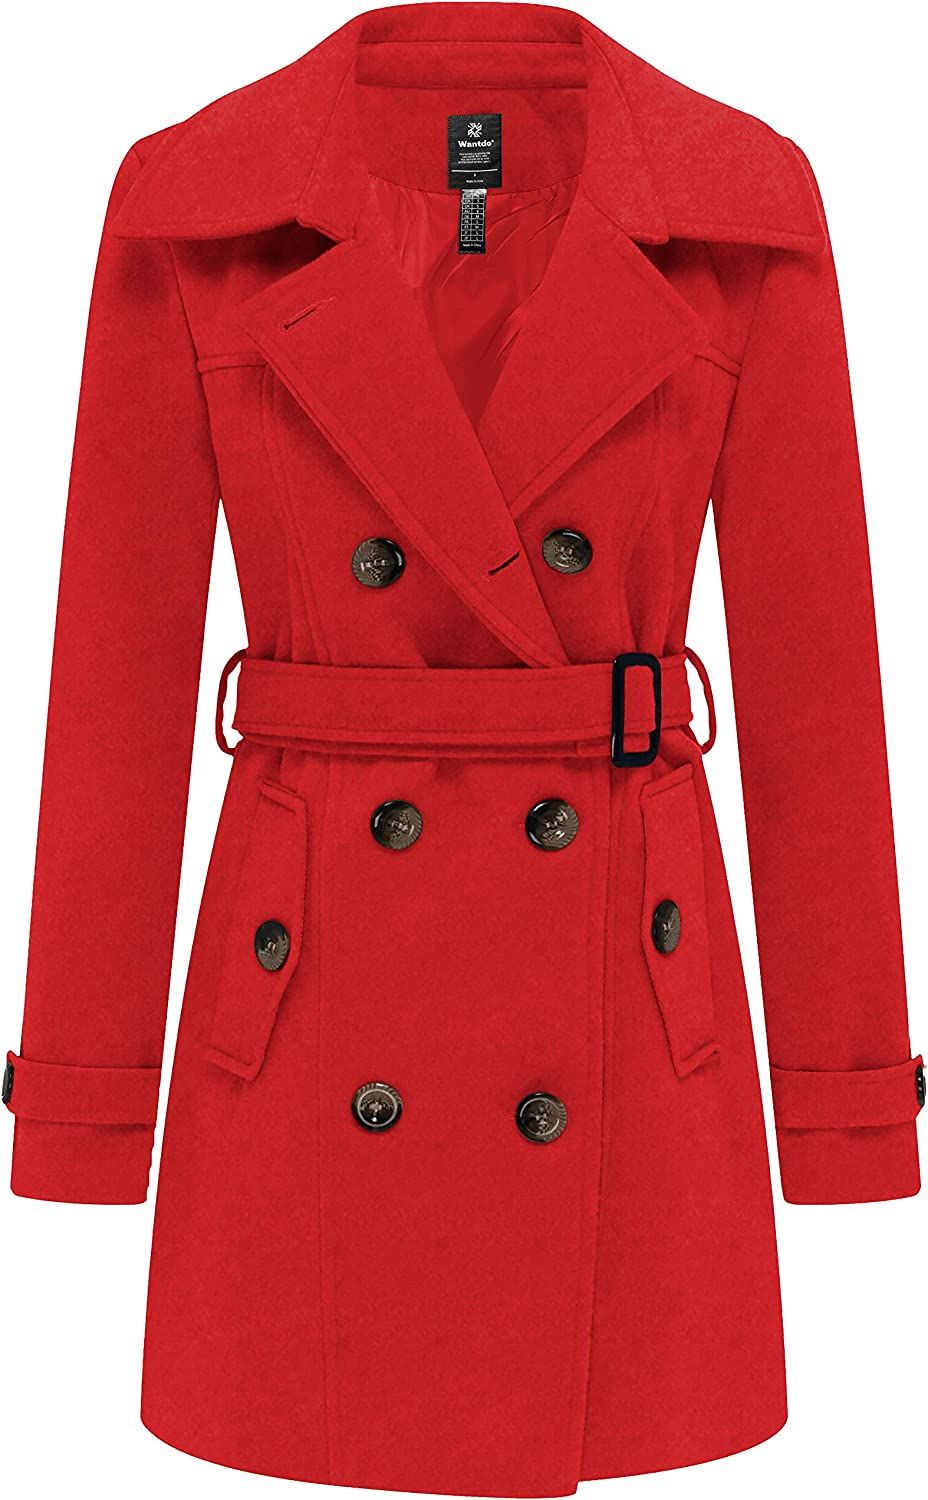 Wantdo Women's Double Breasted Pea Coat Winter Mid-Long Trench Coat with Belt | Amazon (US)